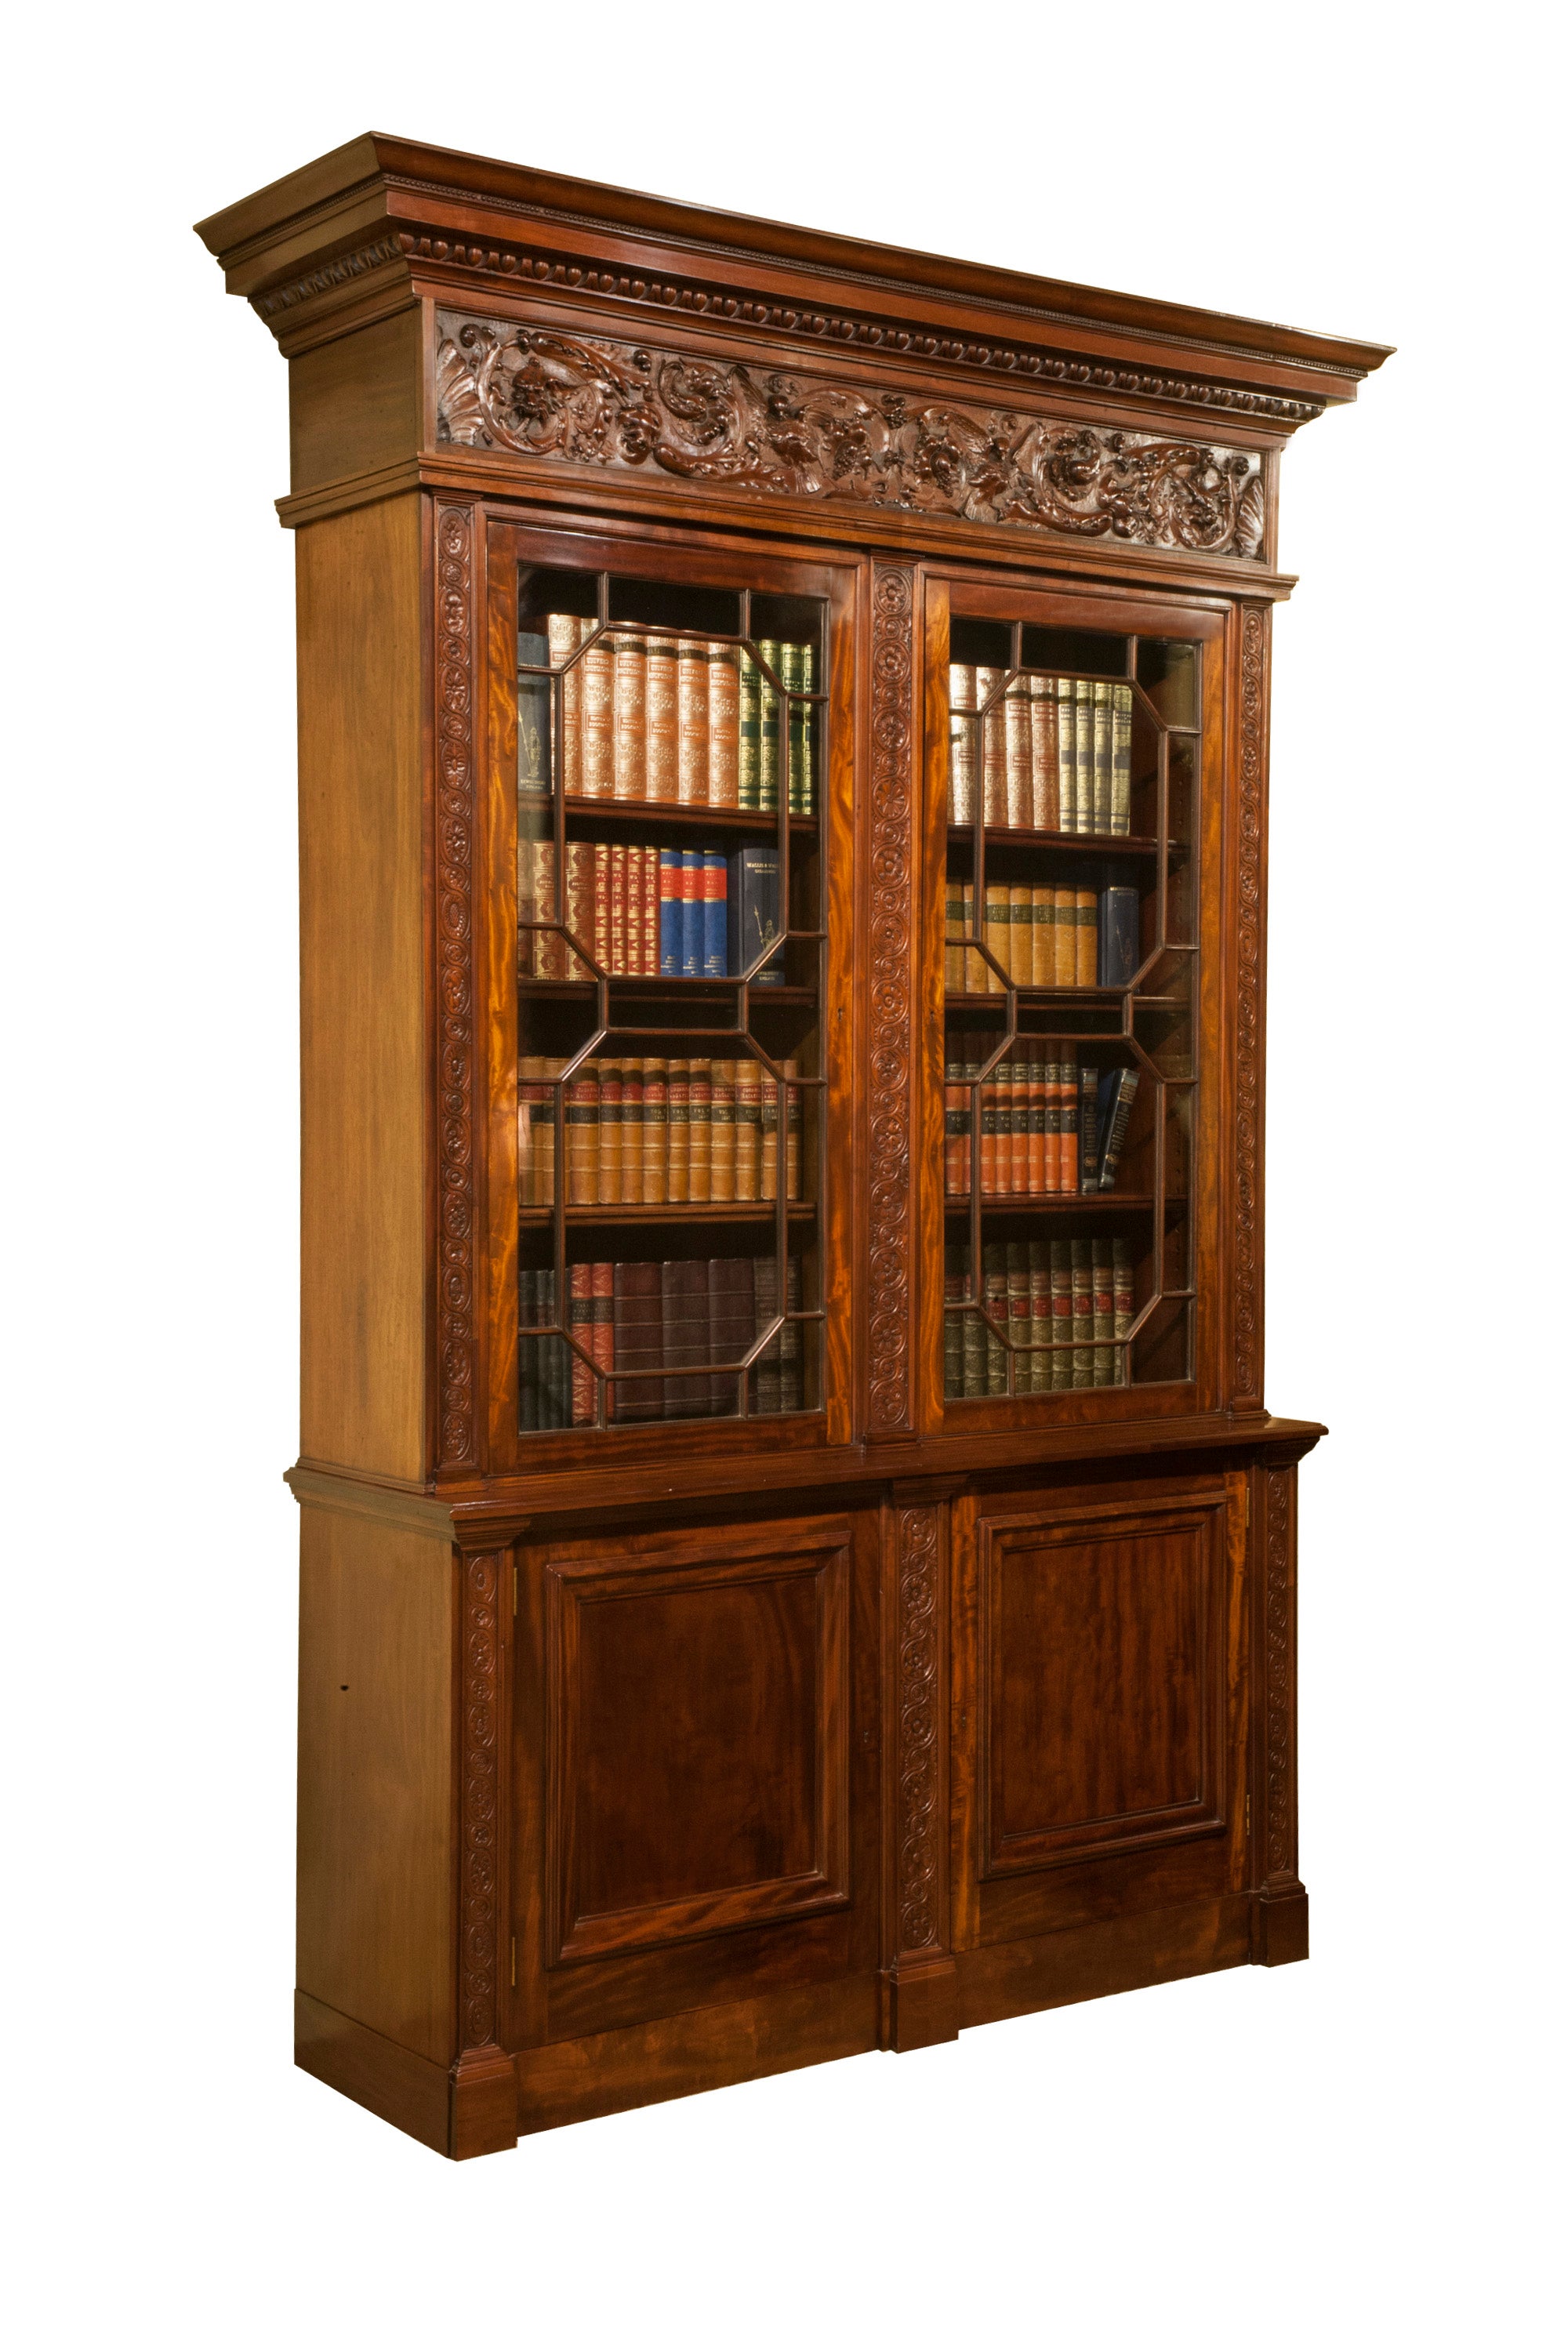 Mahogany Cabinet Bookcase With Ornate And Finely Carved Frieze